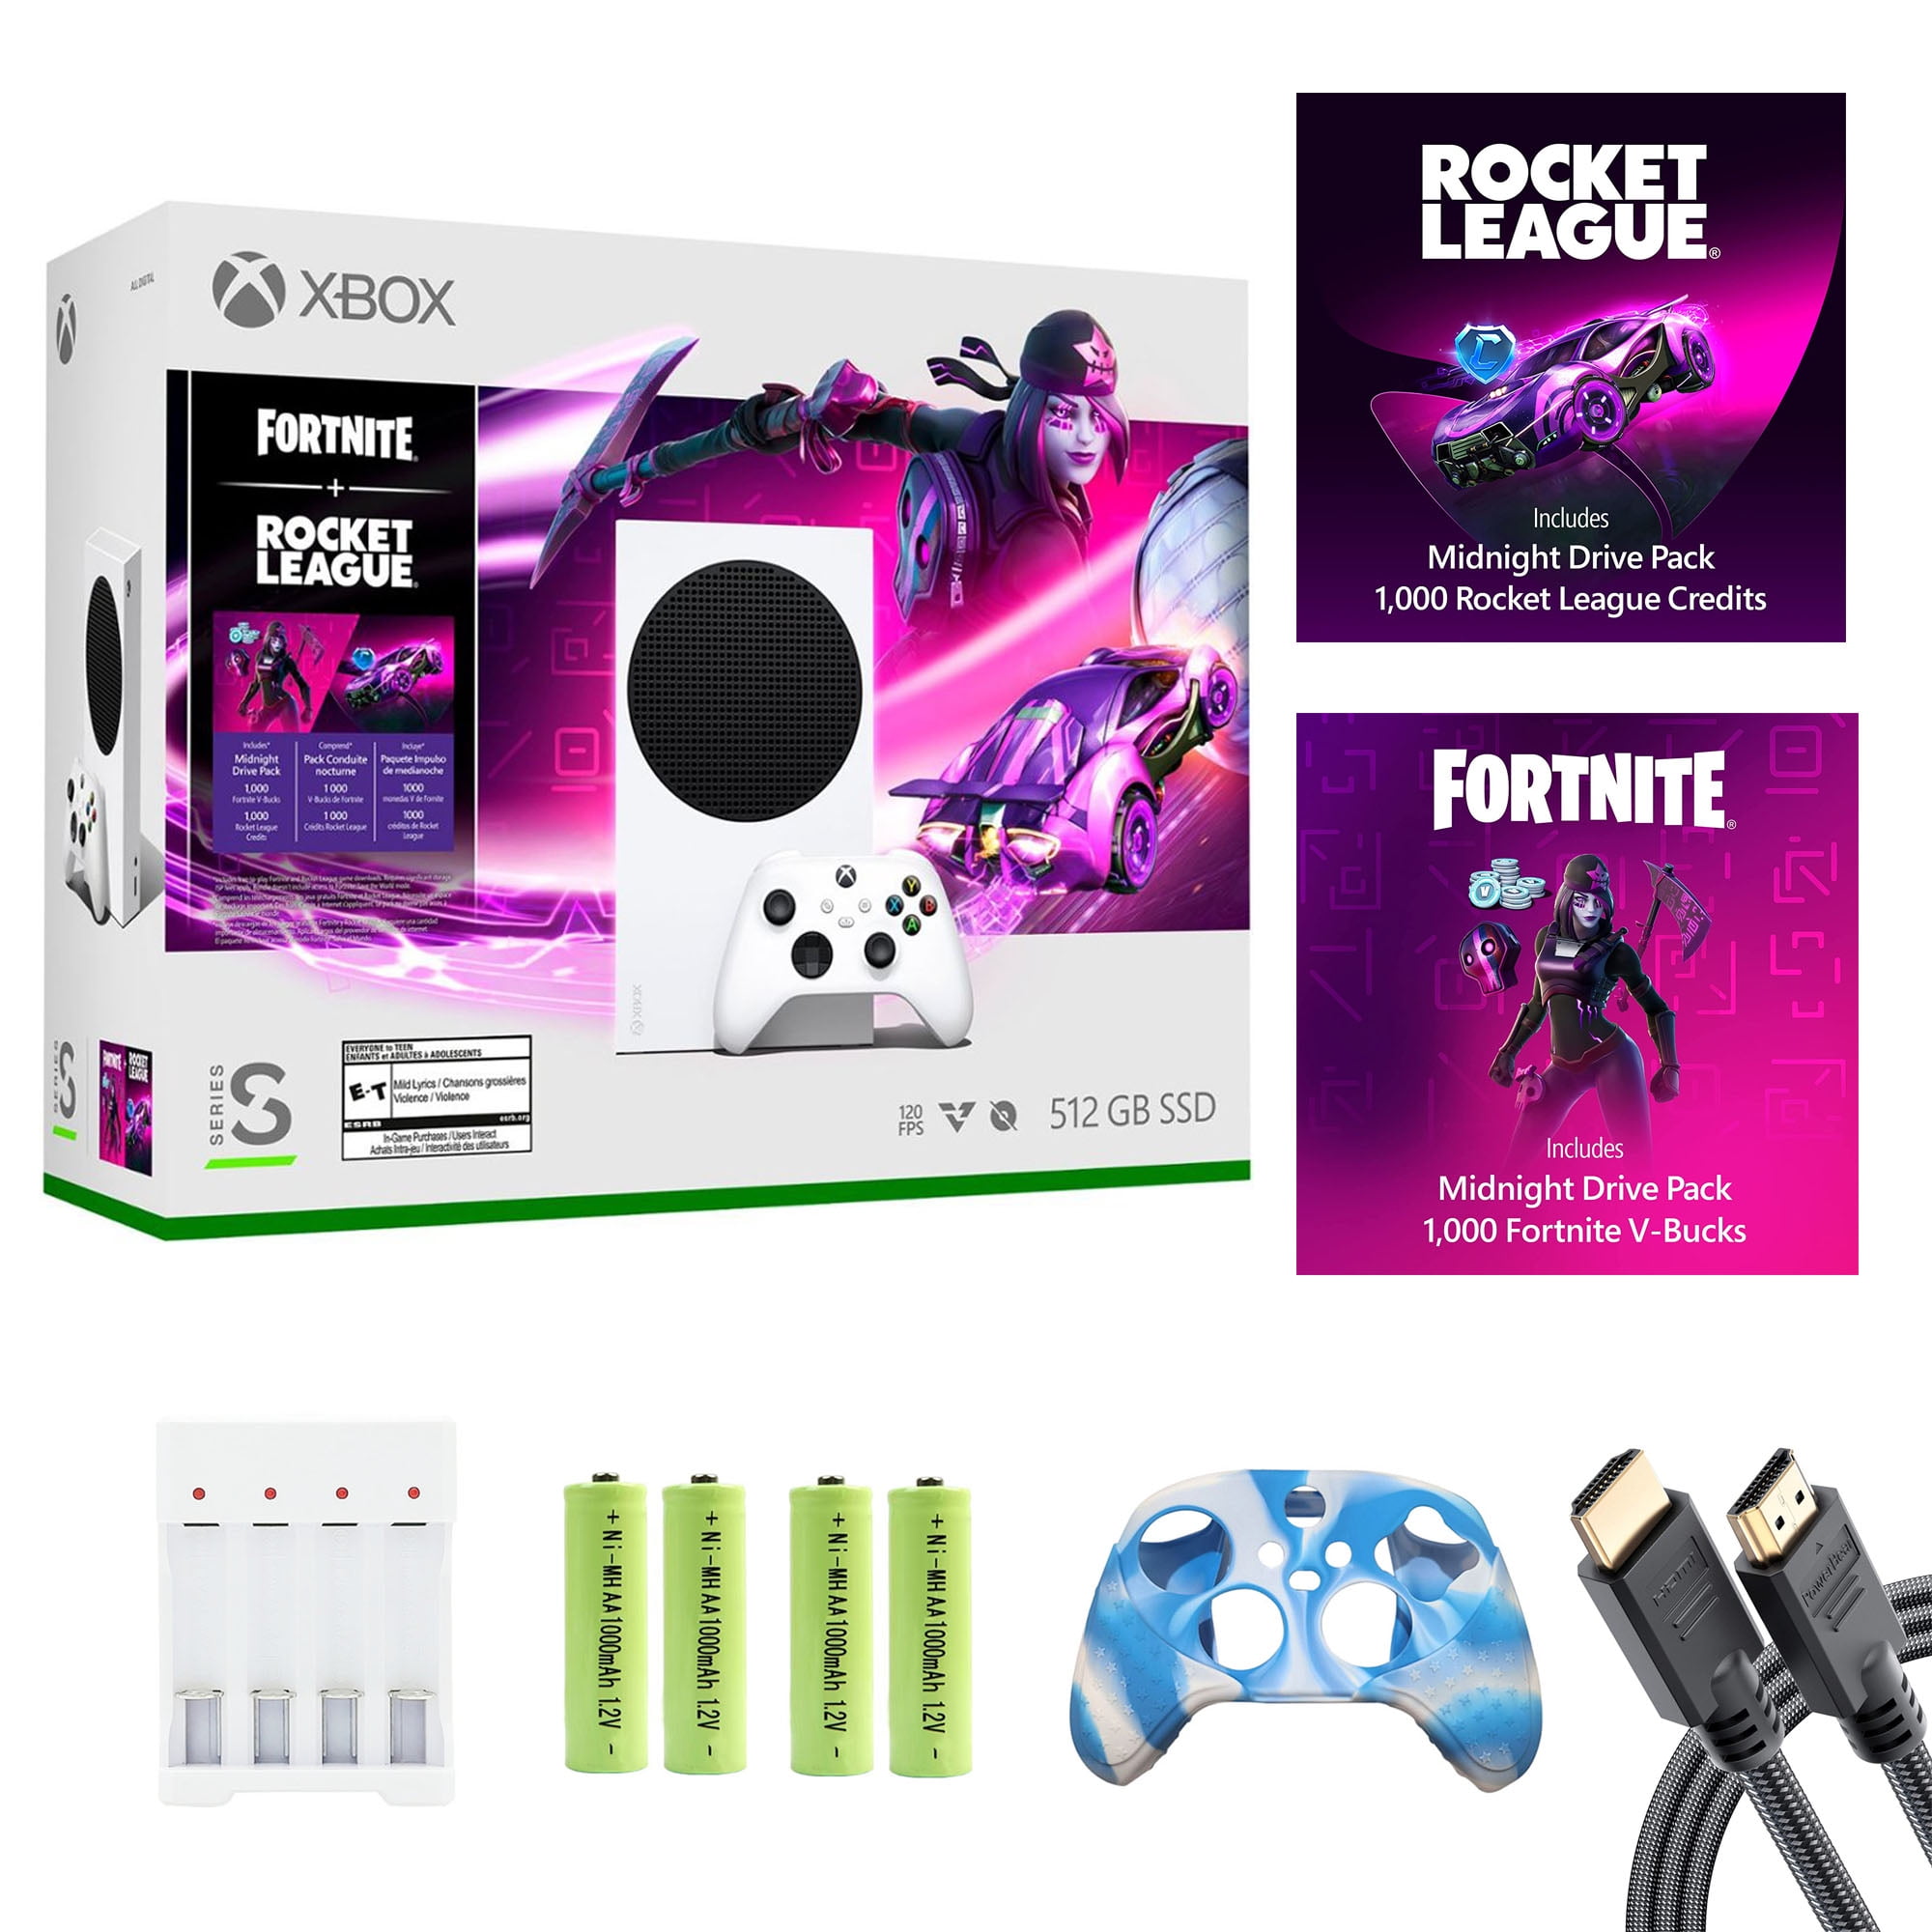 Xbox Cloud Gaming for Fortnite - What's the Deal?